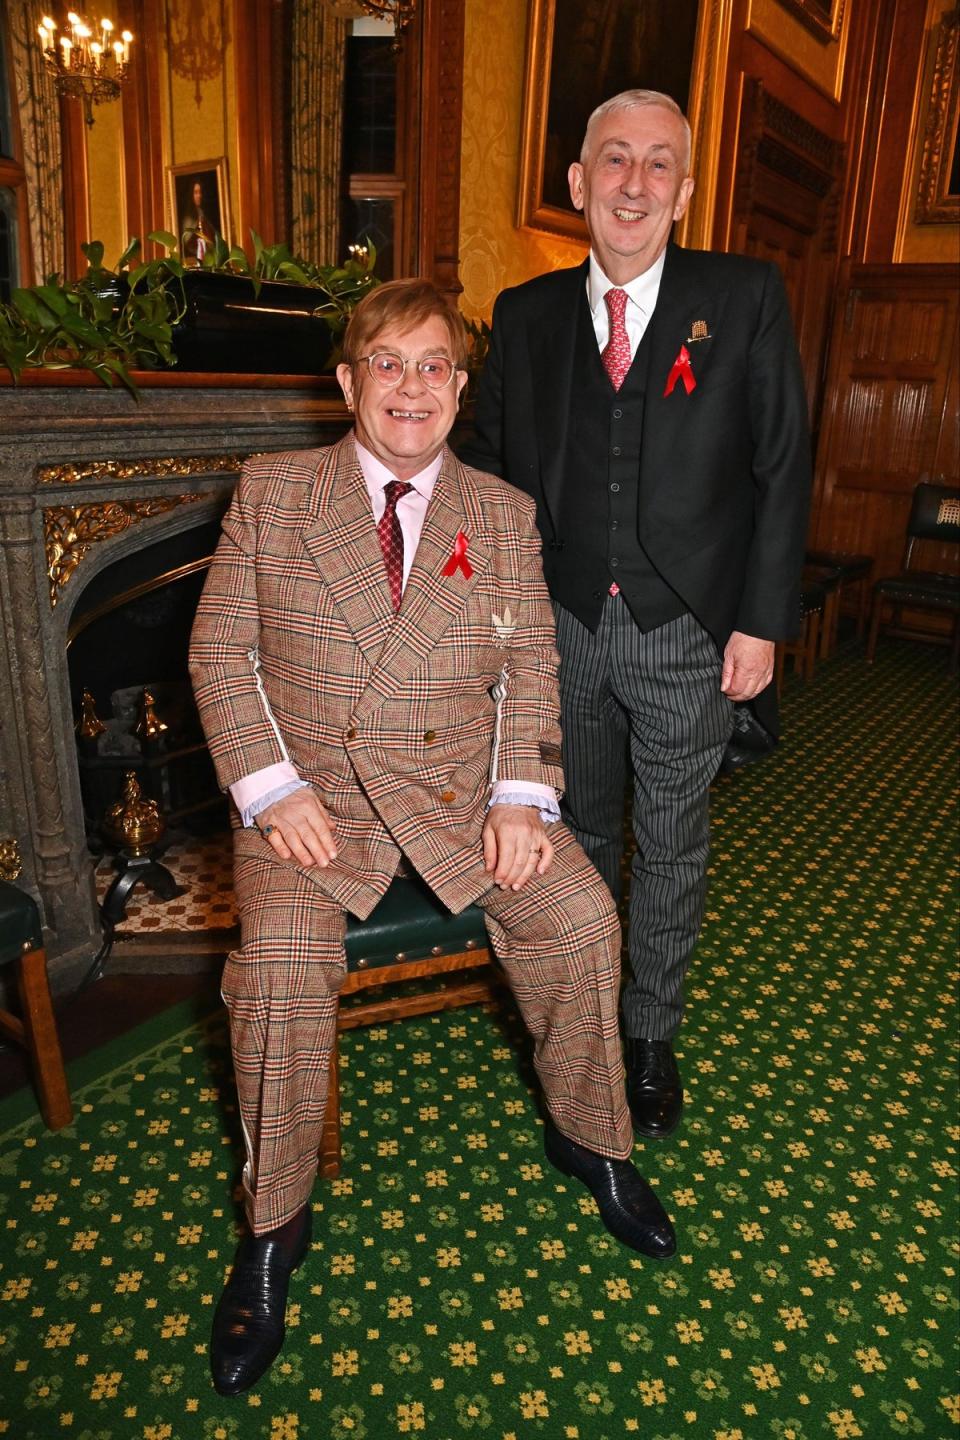 Sir Elton John pictured with Speaker of the House of Commons Sir Lindsay Hoyle at the event (Dave Benett)